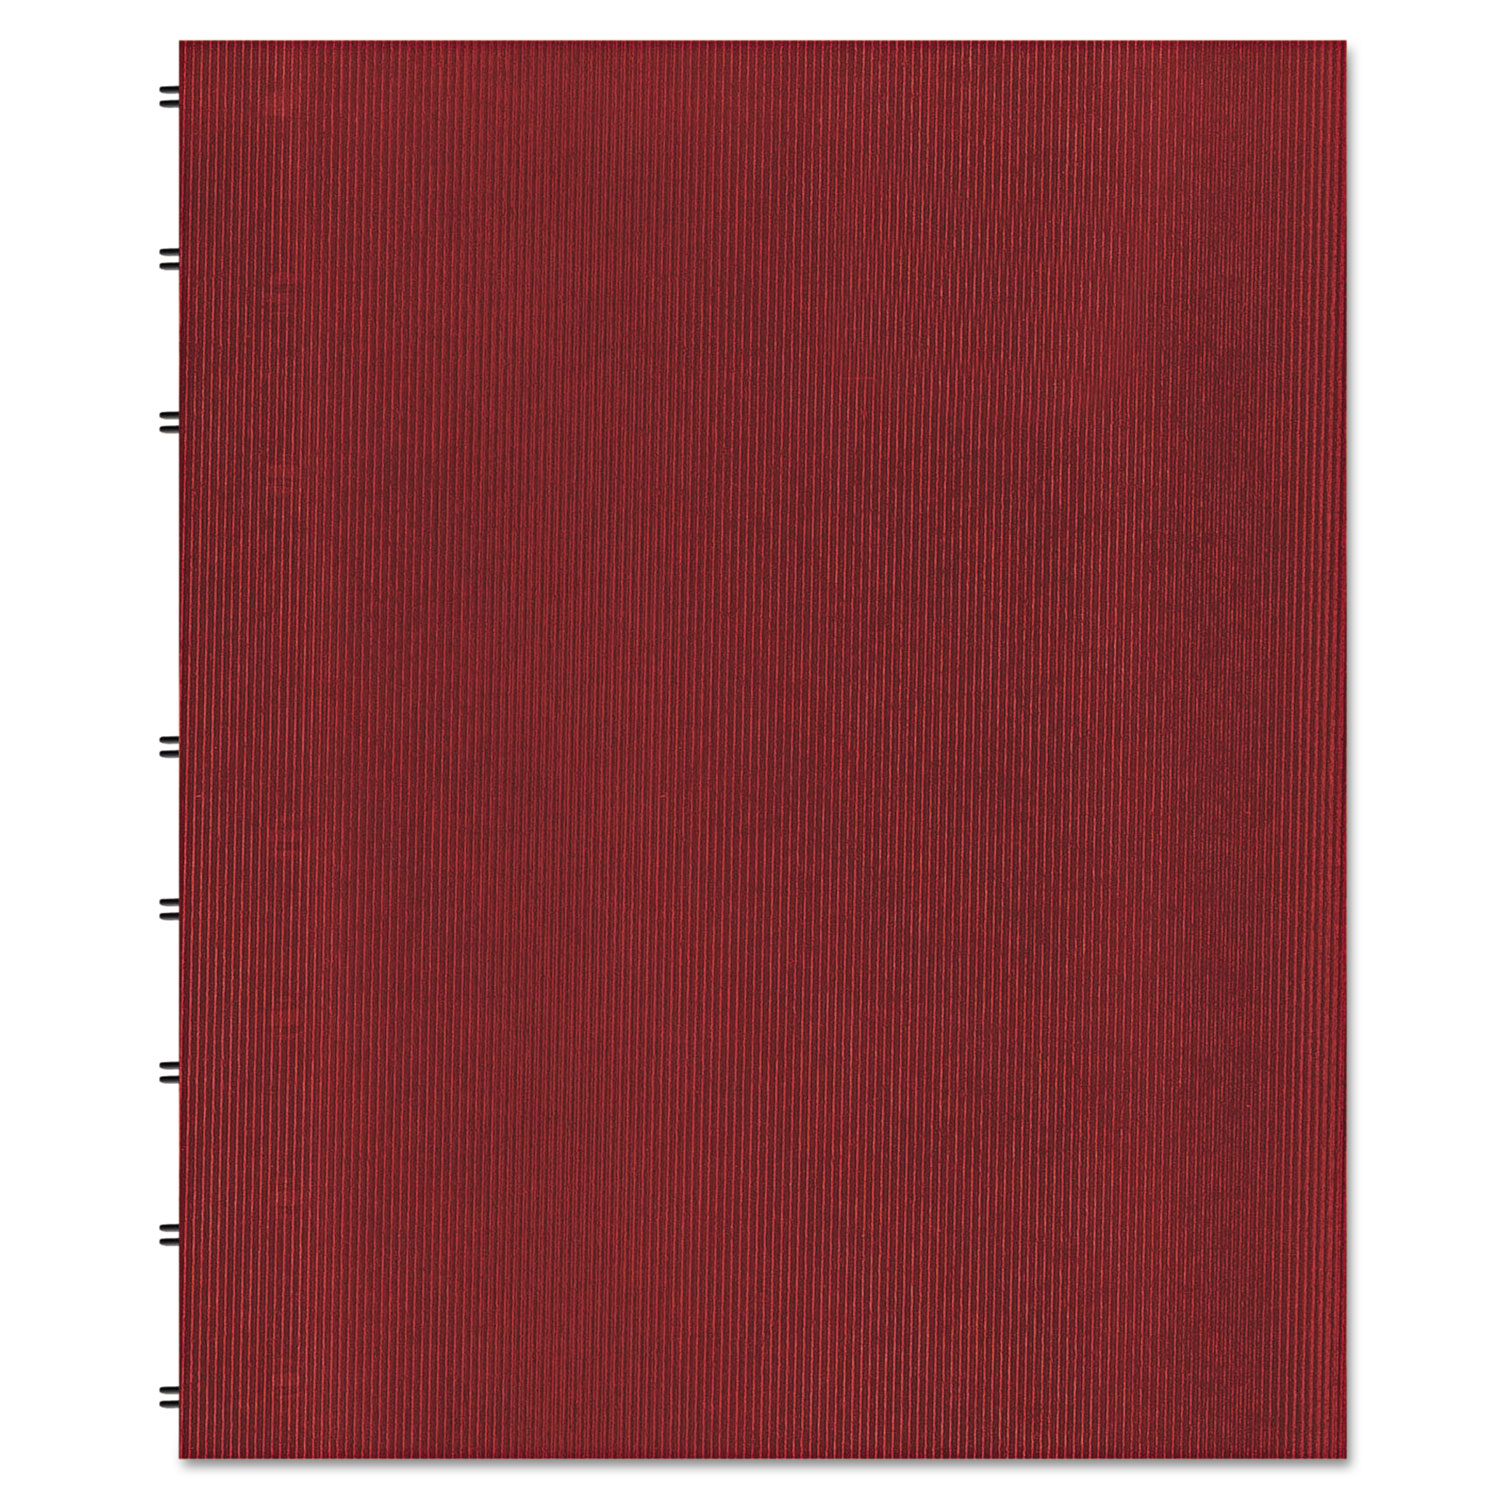  Blueline AF11150.83 MiracleBind Notebook, 1 Subject, Medium/College Rule, Red Cover, 11 x 9.06, 75 Sheets (REDAF1115083) 